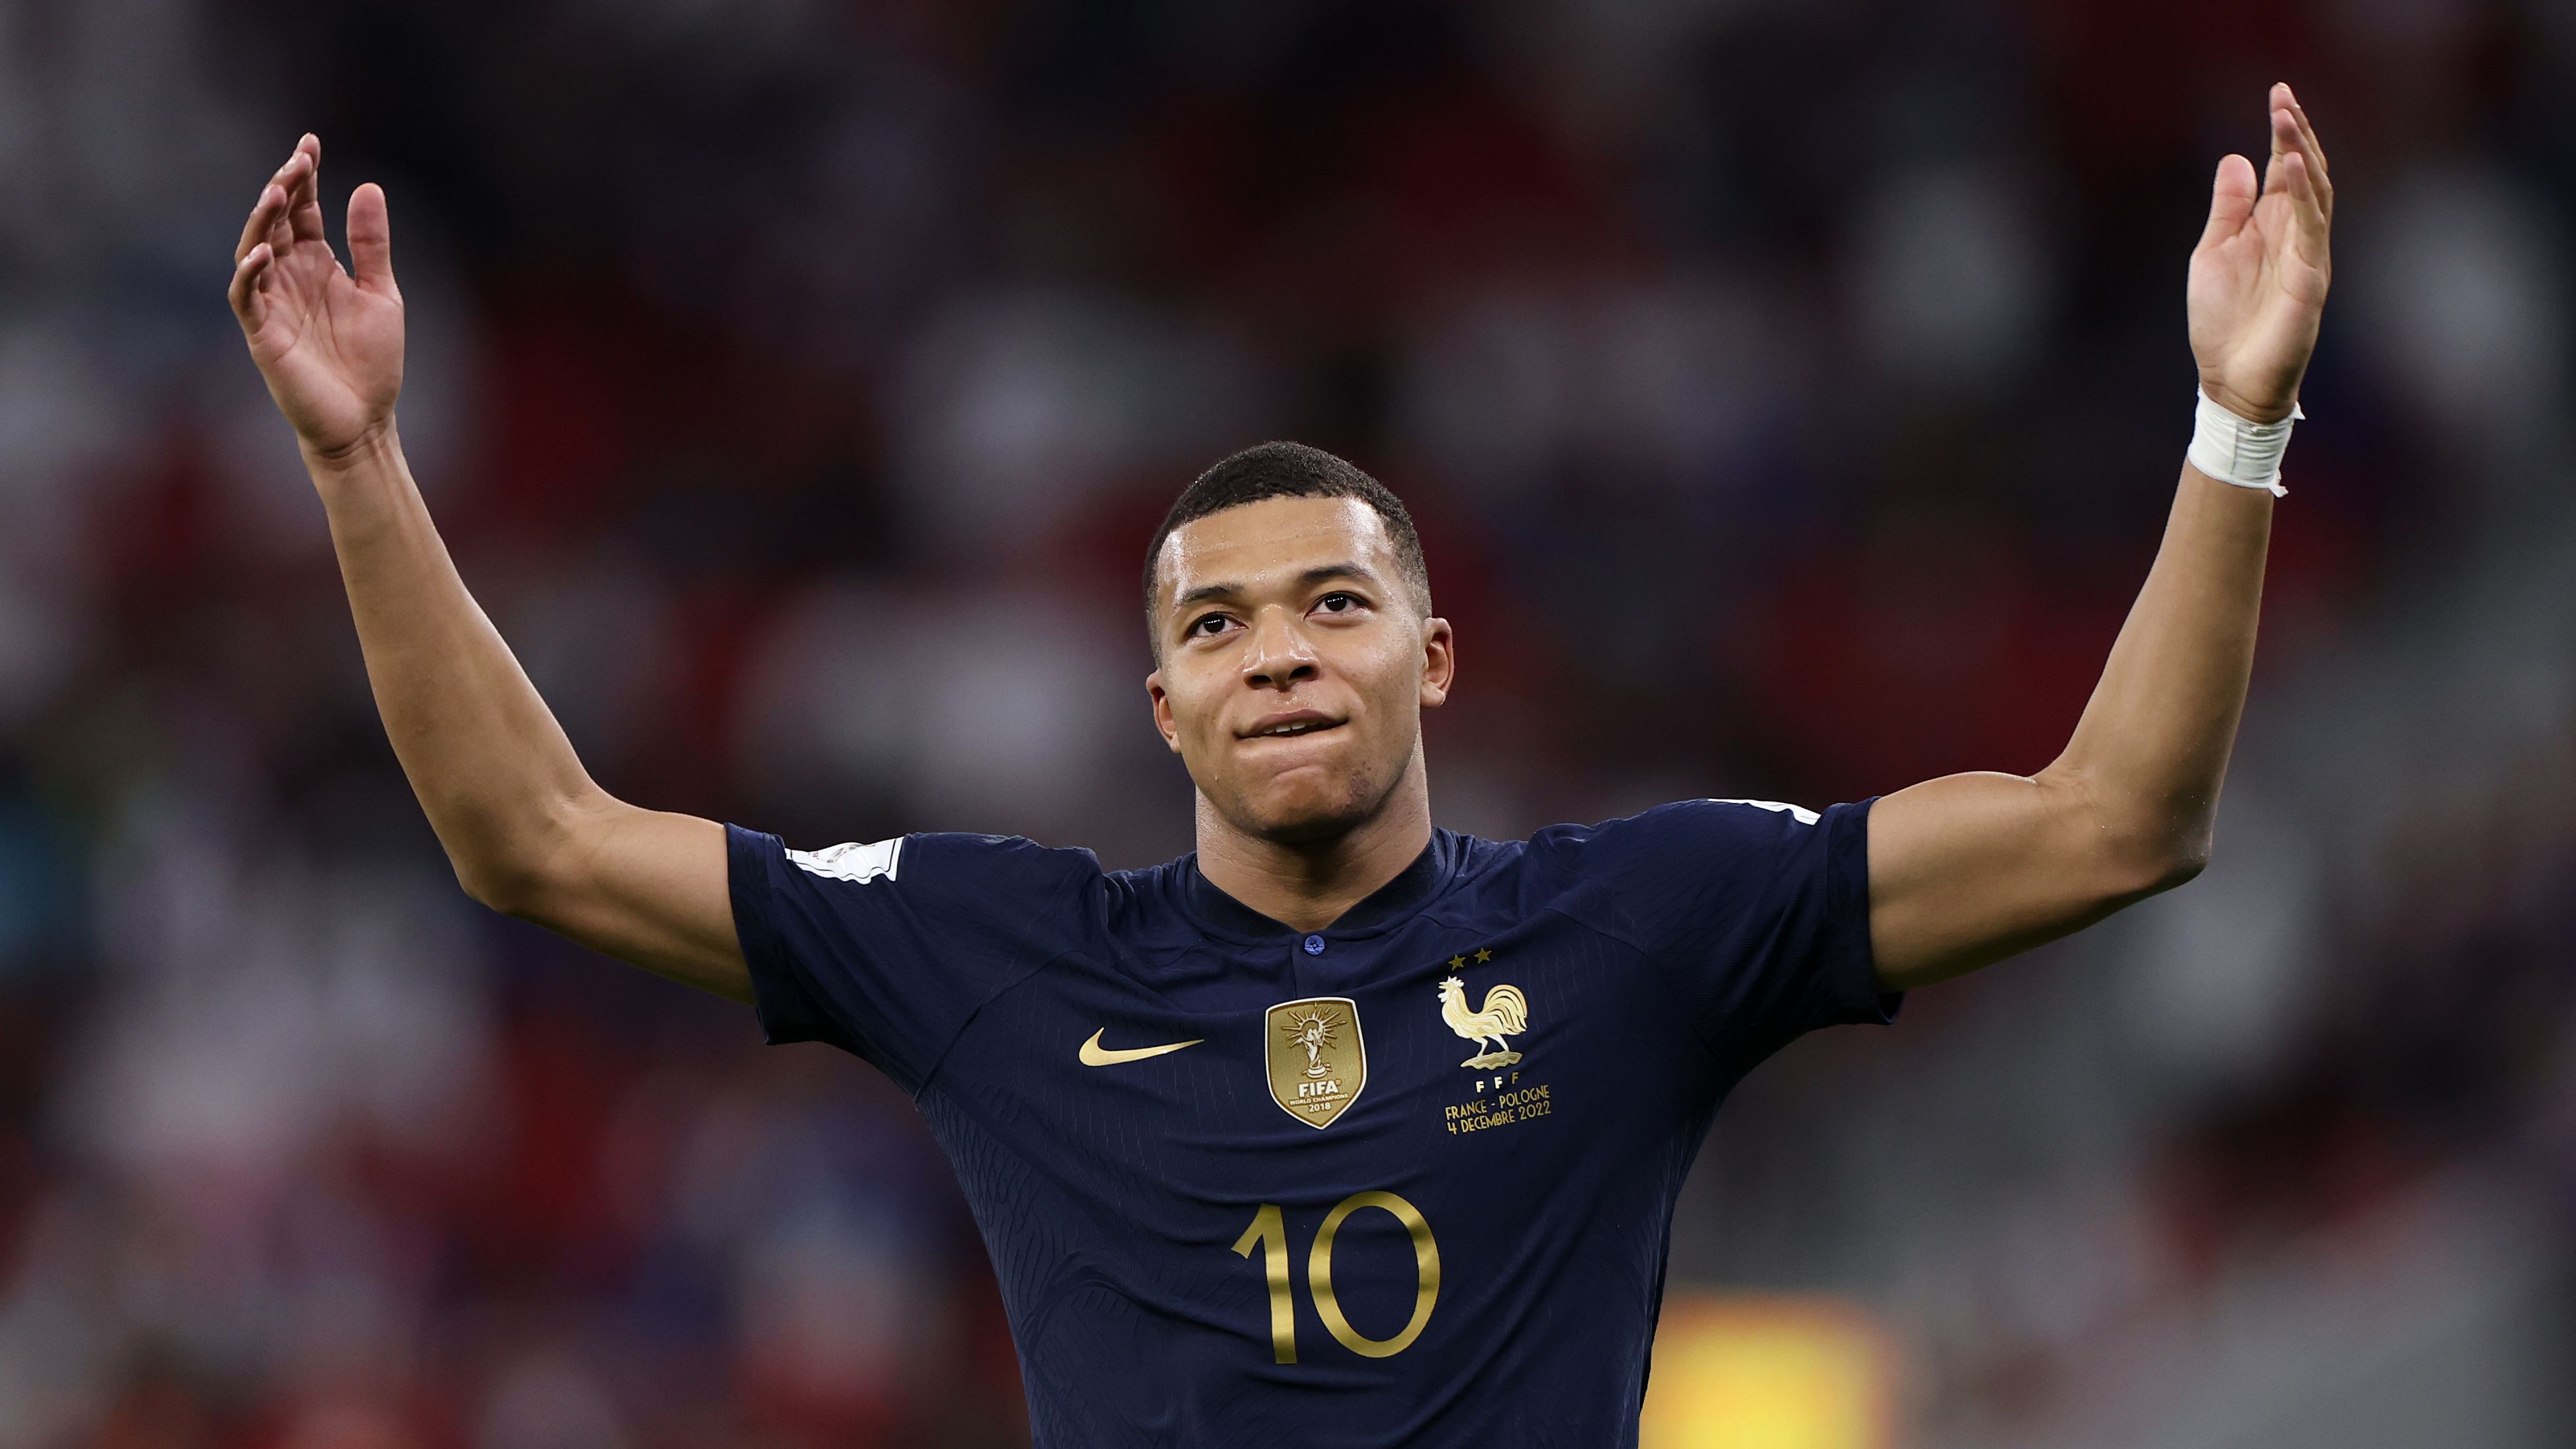 Kylian Mbappe celebrates after scoring his second goal against Poland.